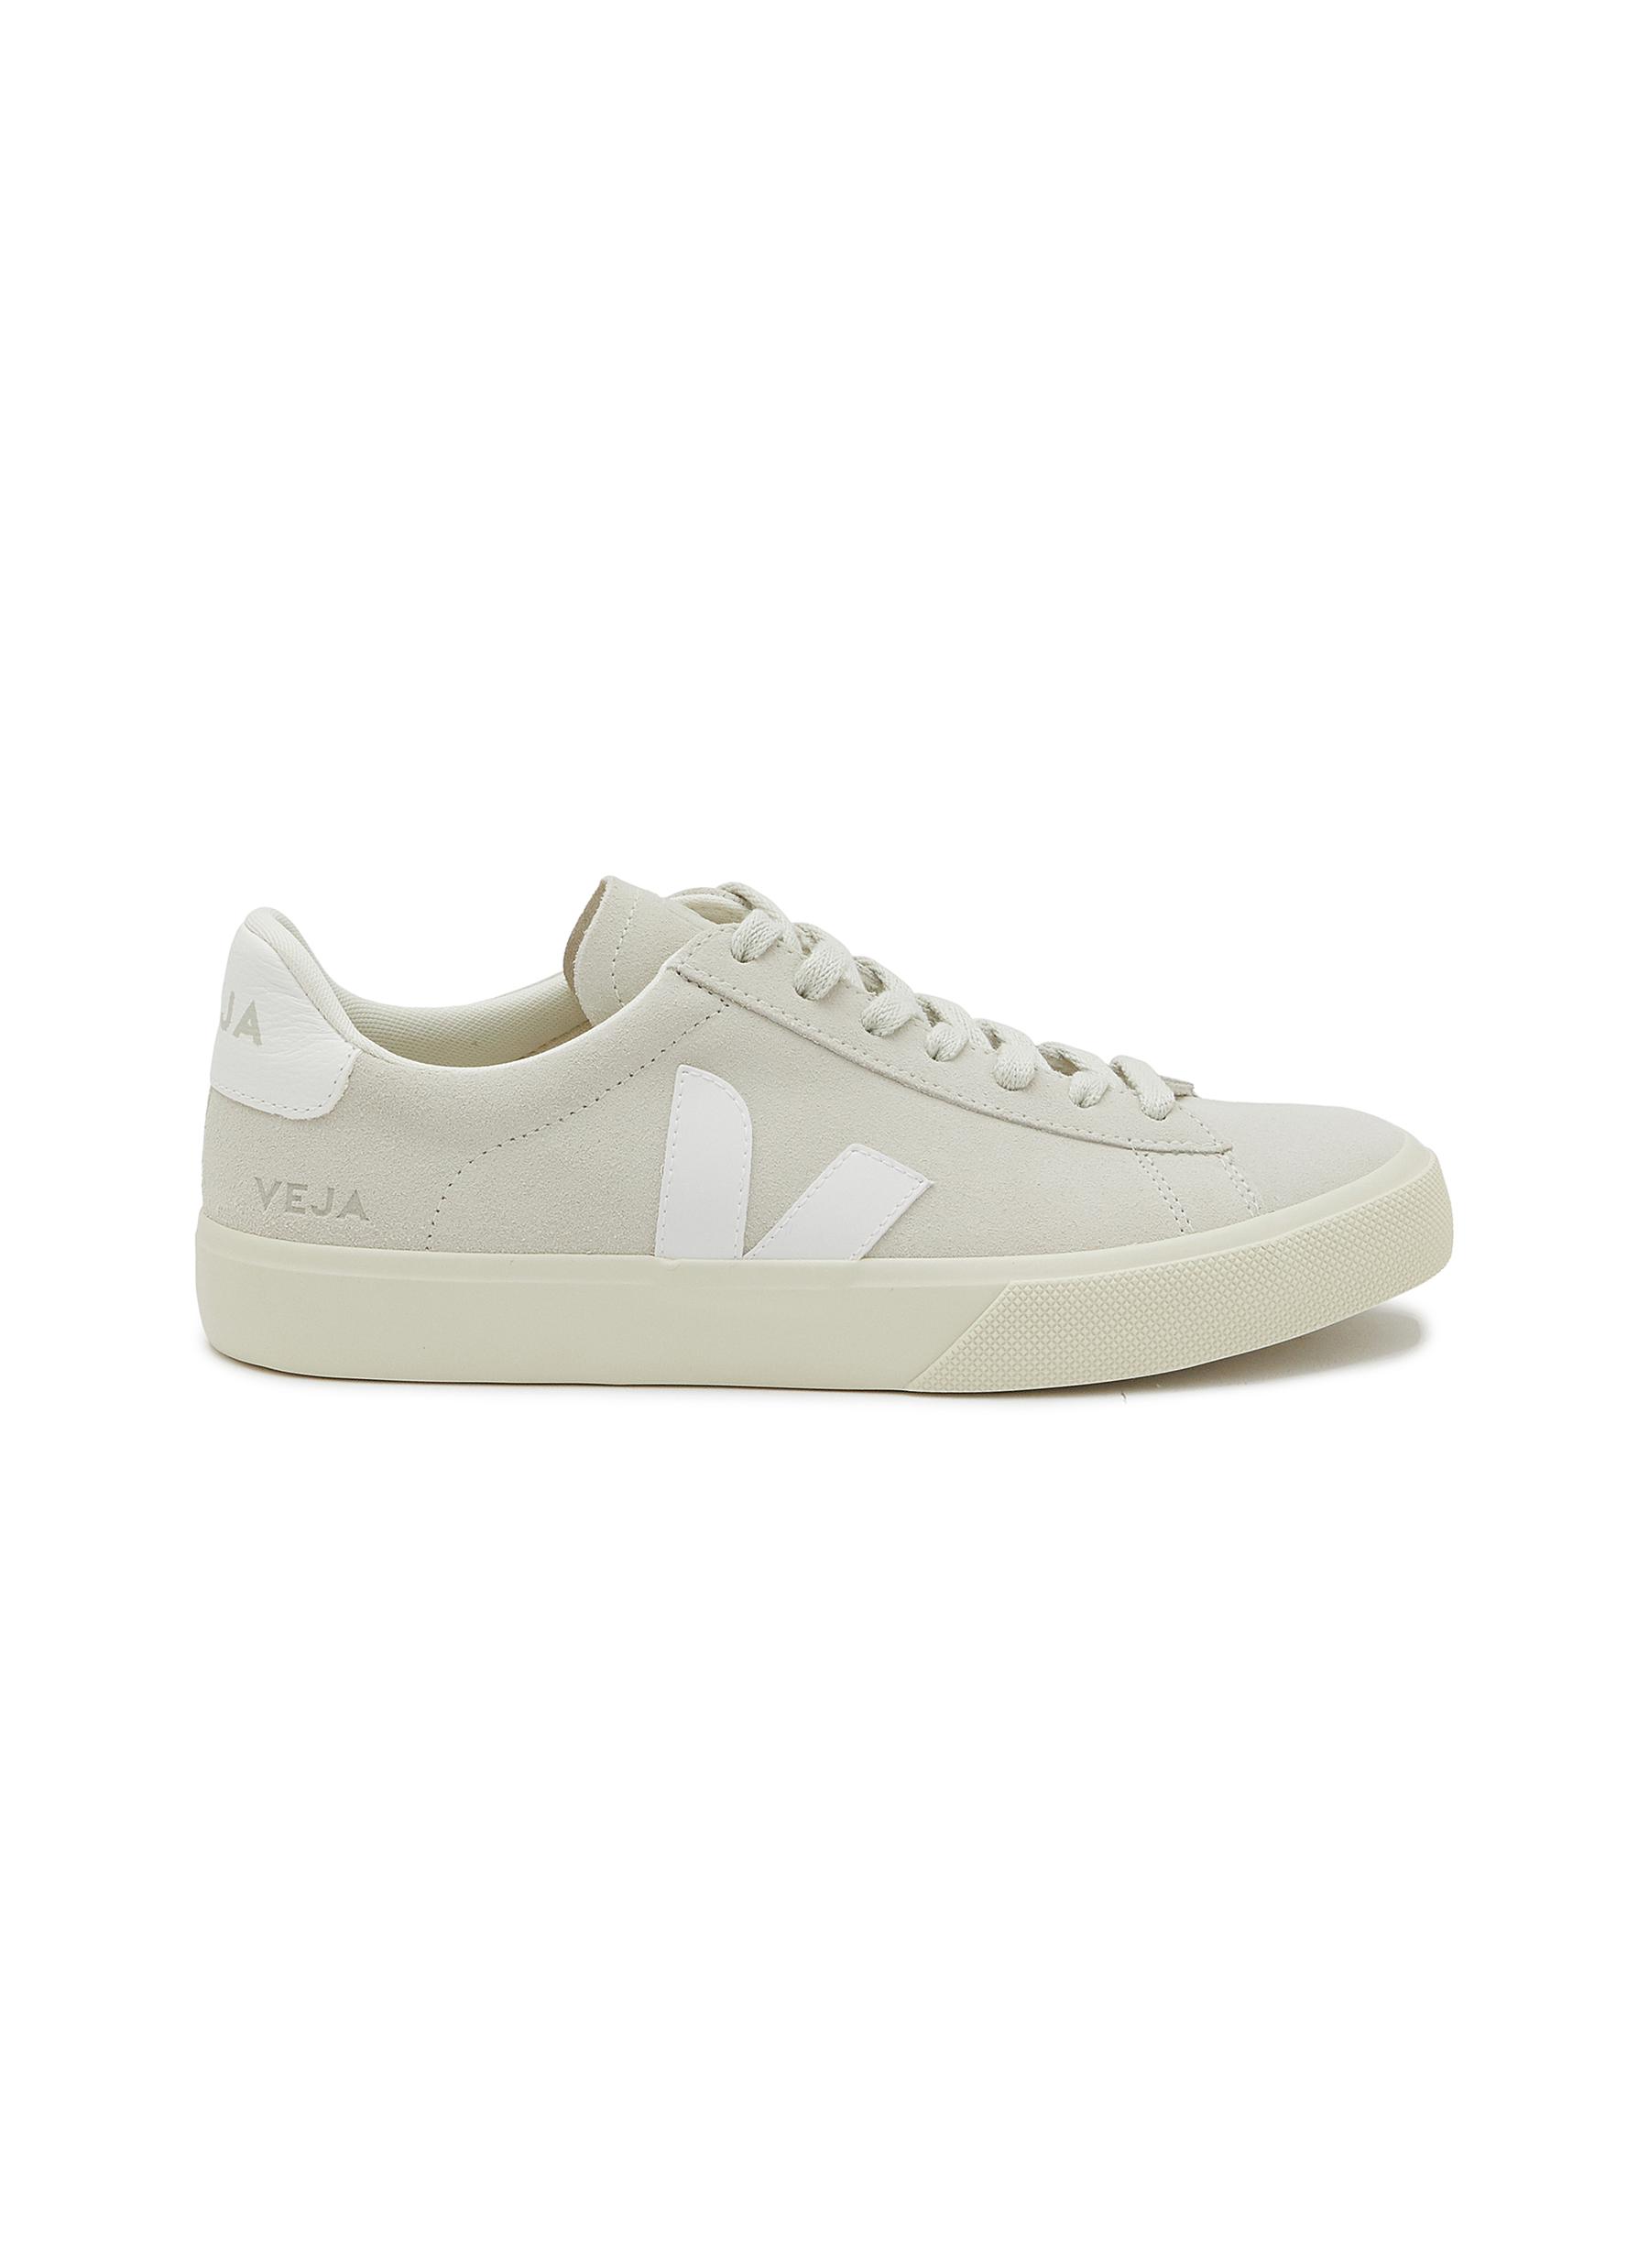 VEJA ‘CAMPO' SUEDE LOW TOP LACE UP SNEAKERS